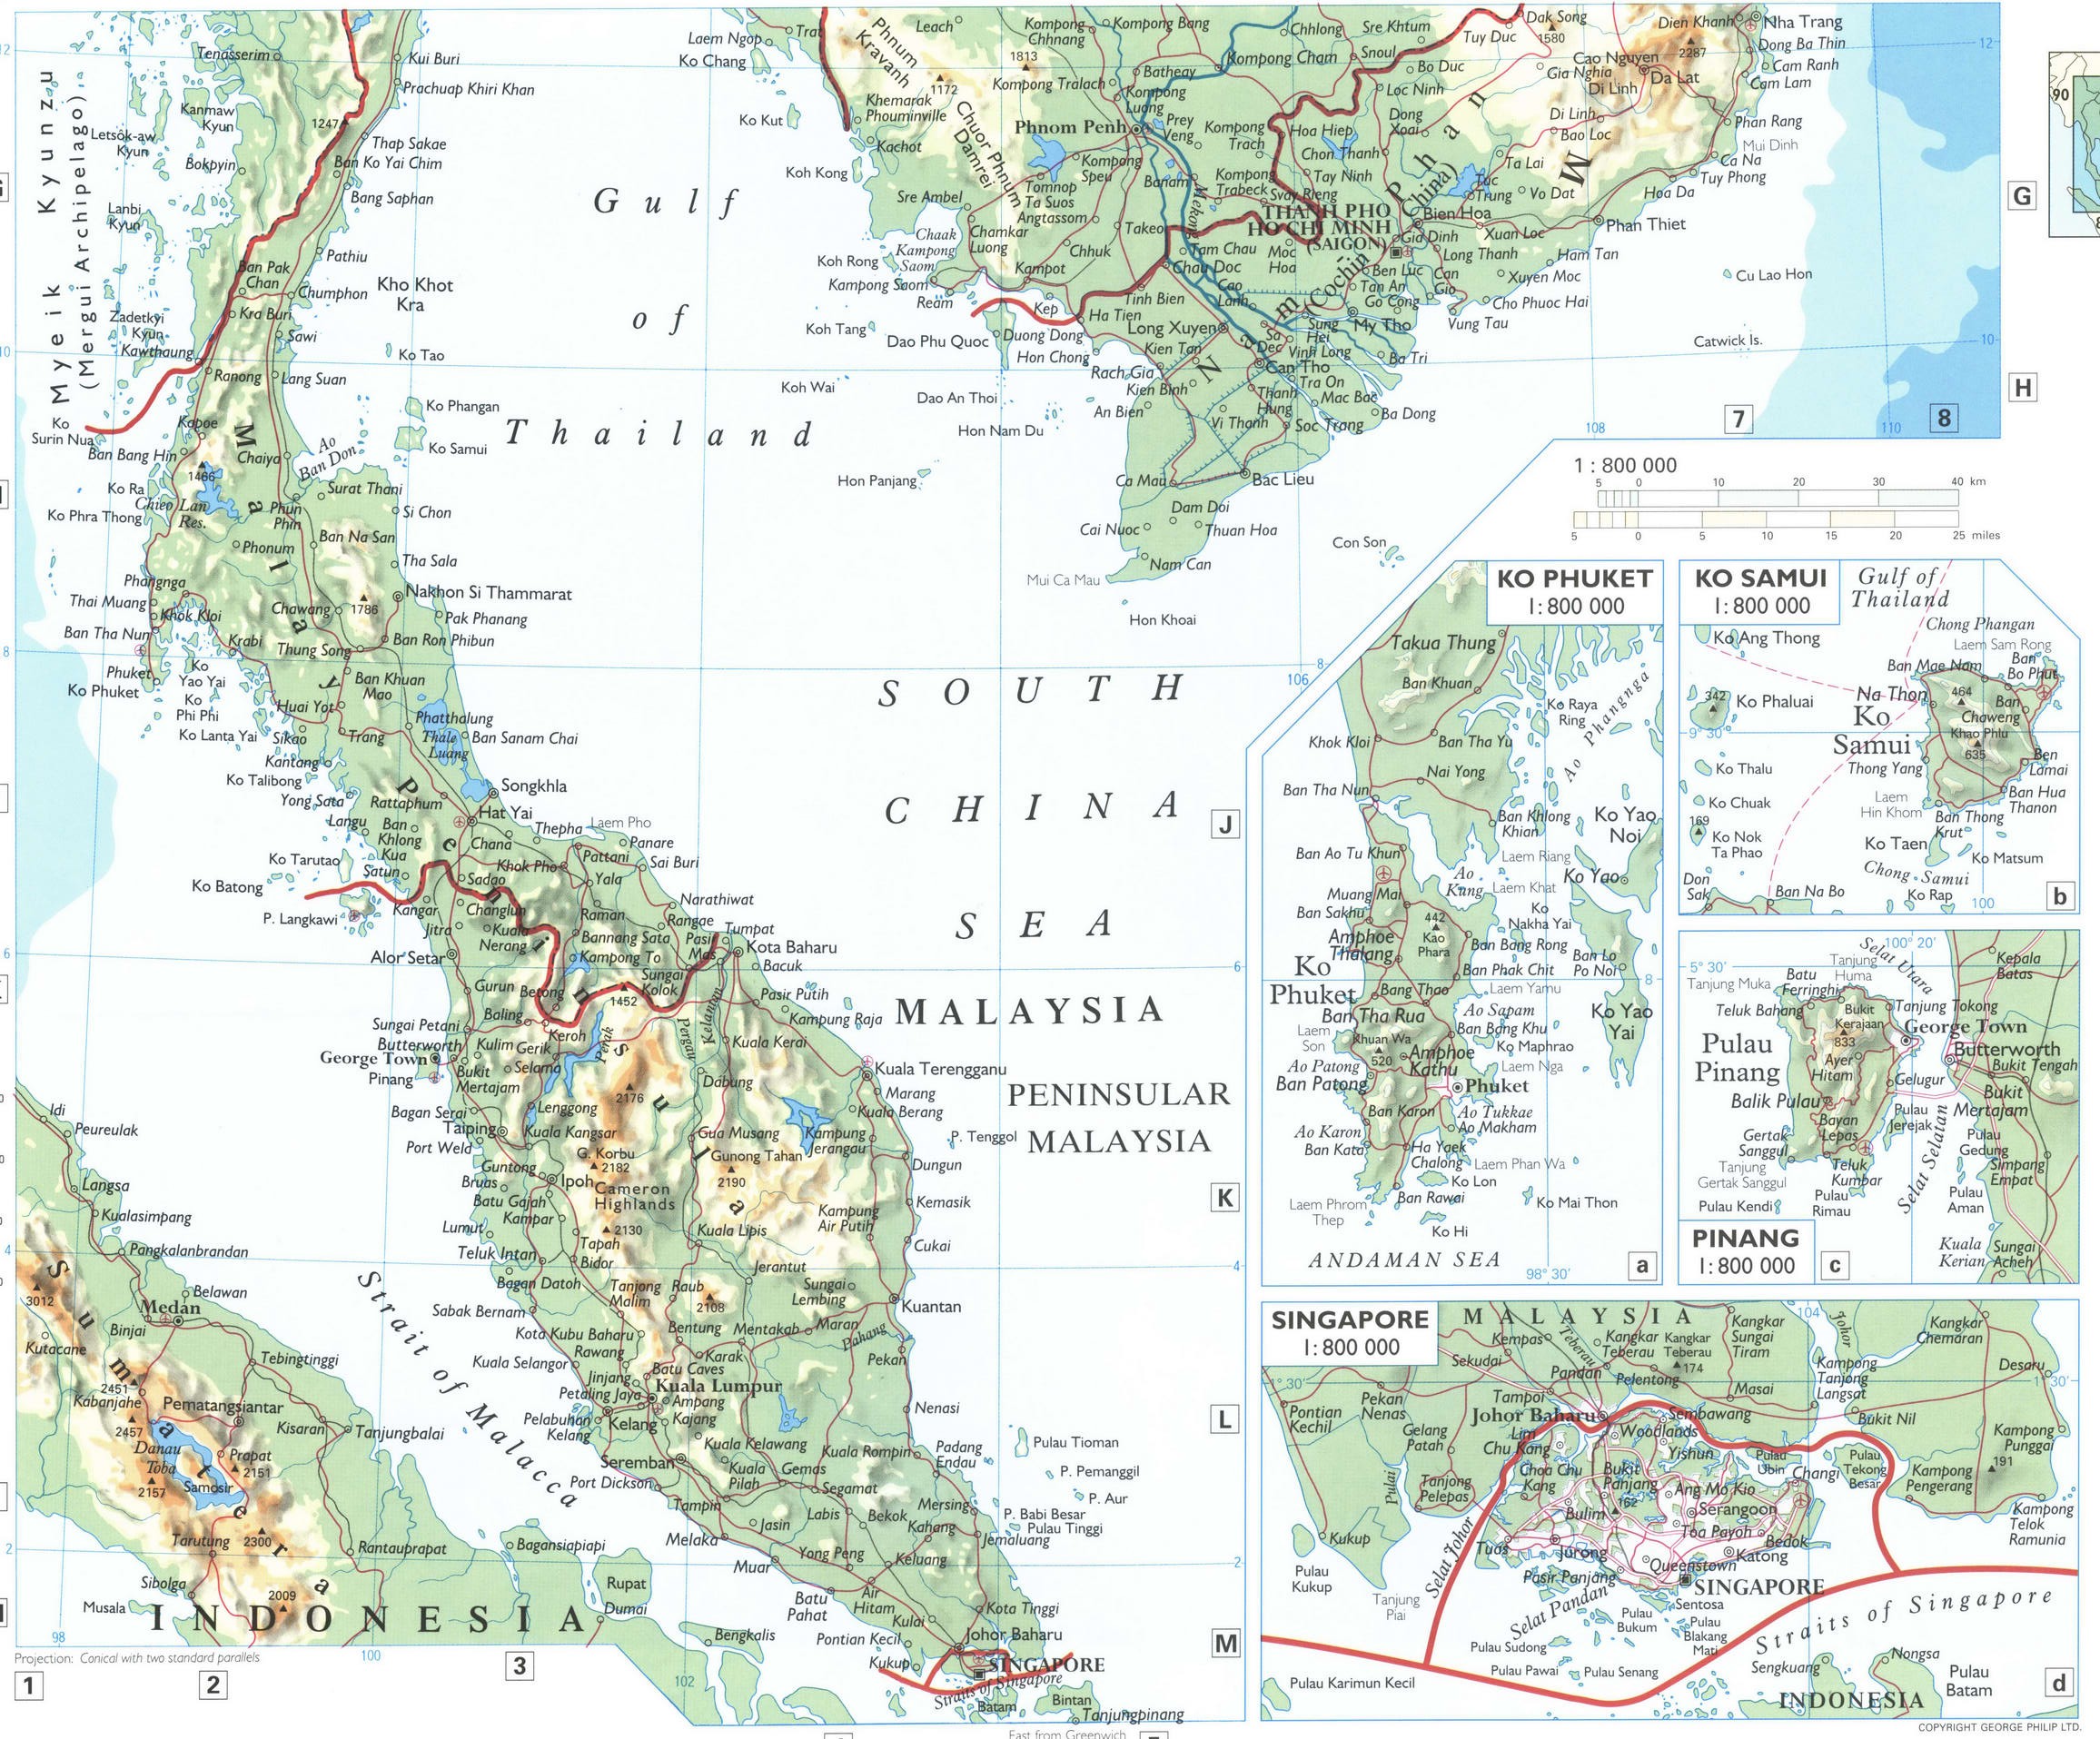 Laos and Thailand map